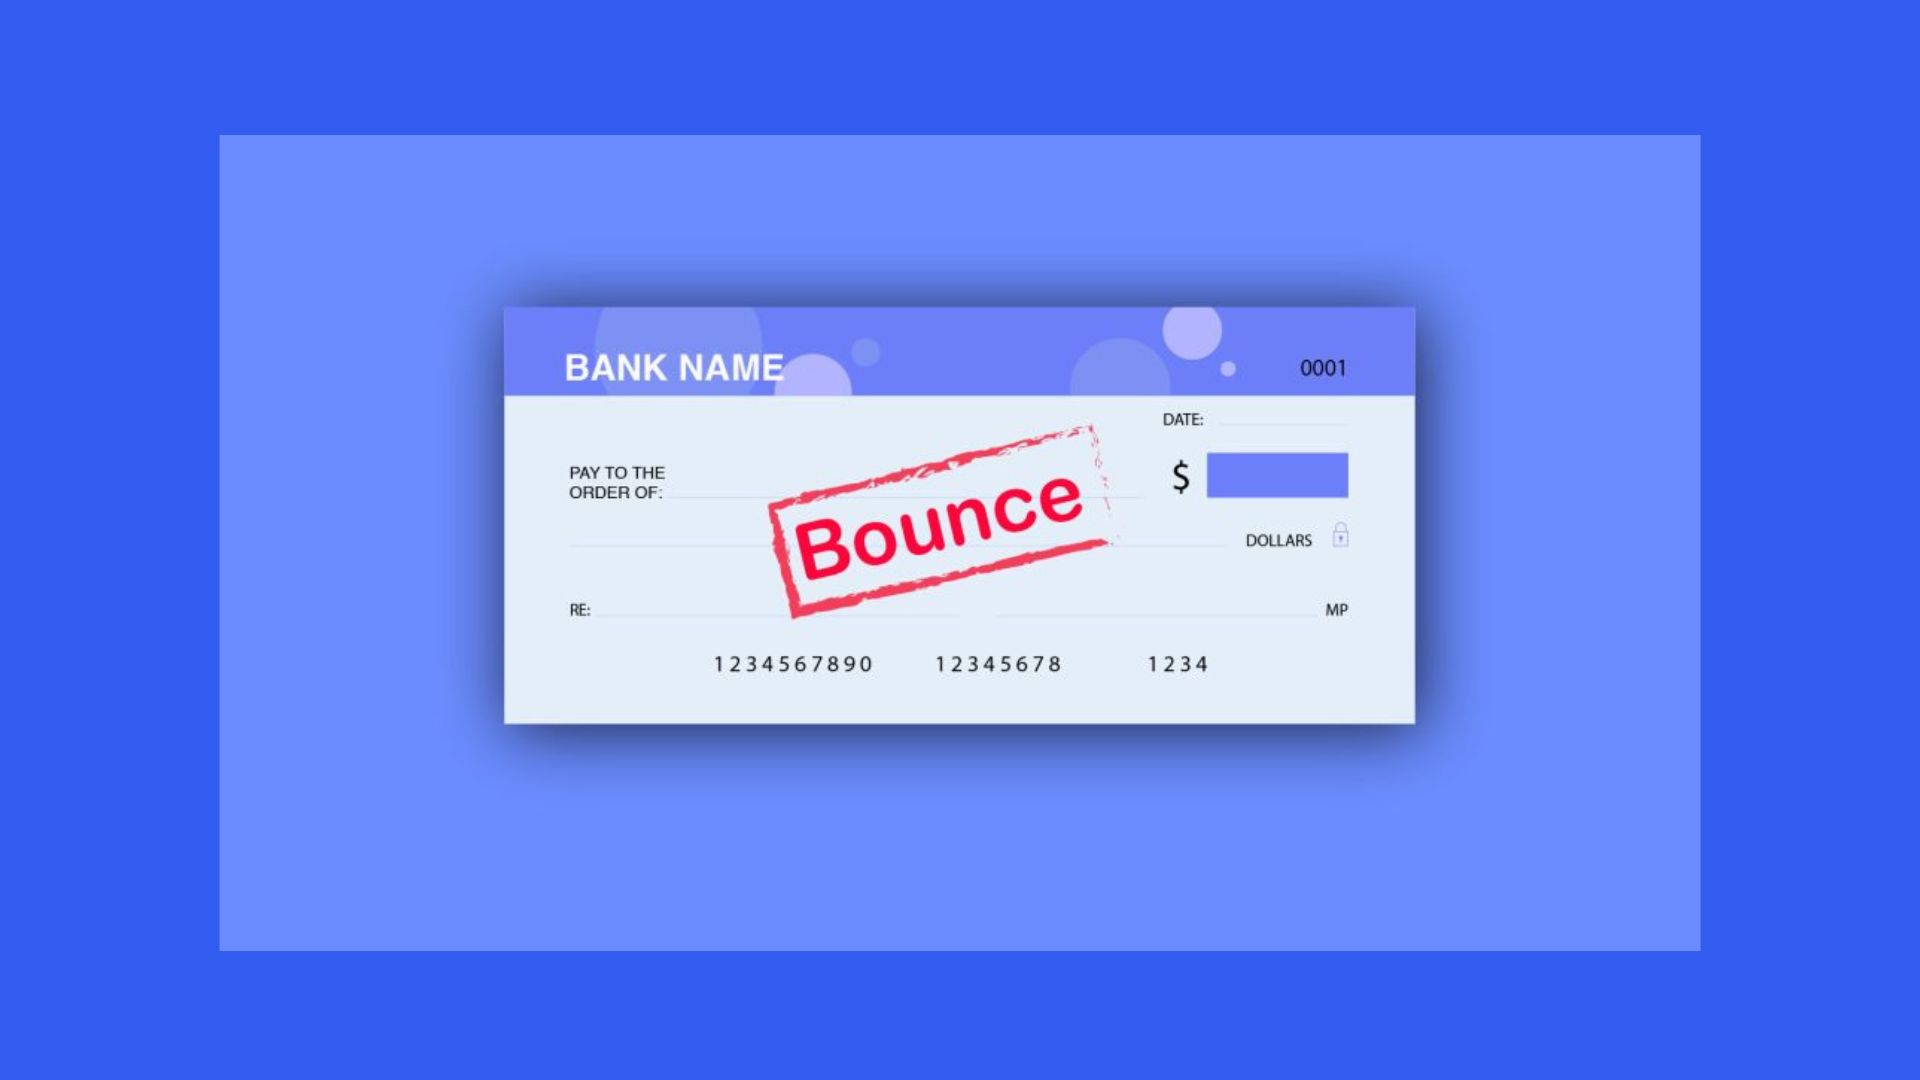 What To Do After Receiving Bounced Check